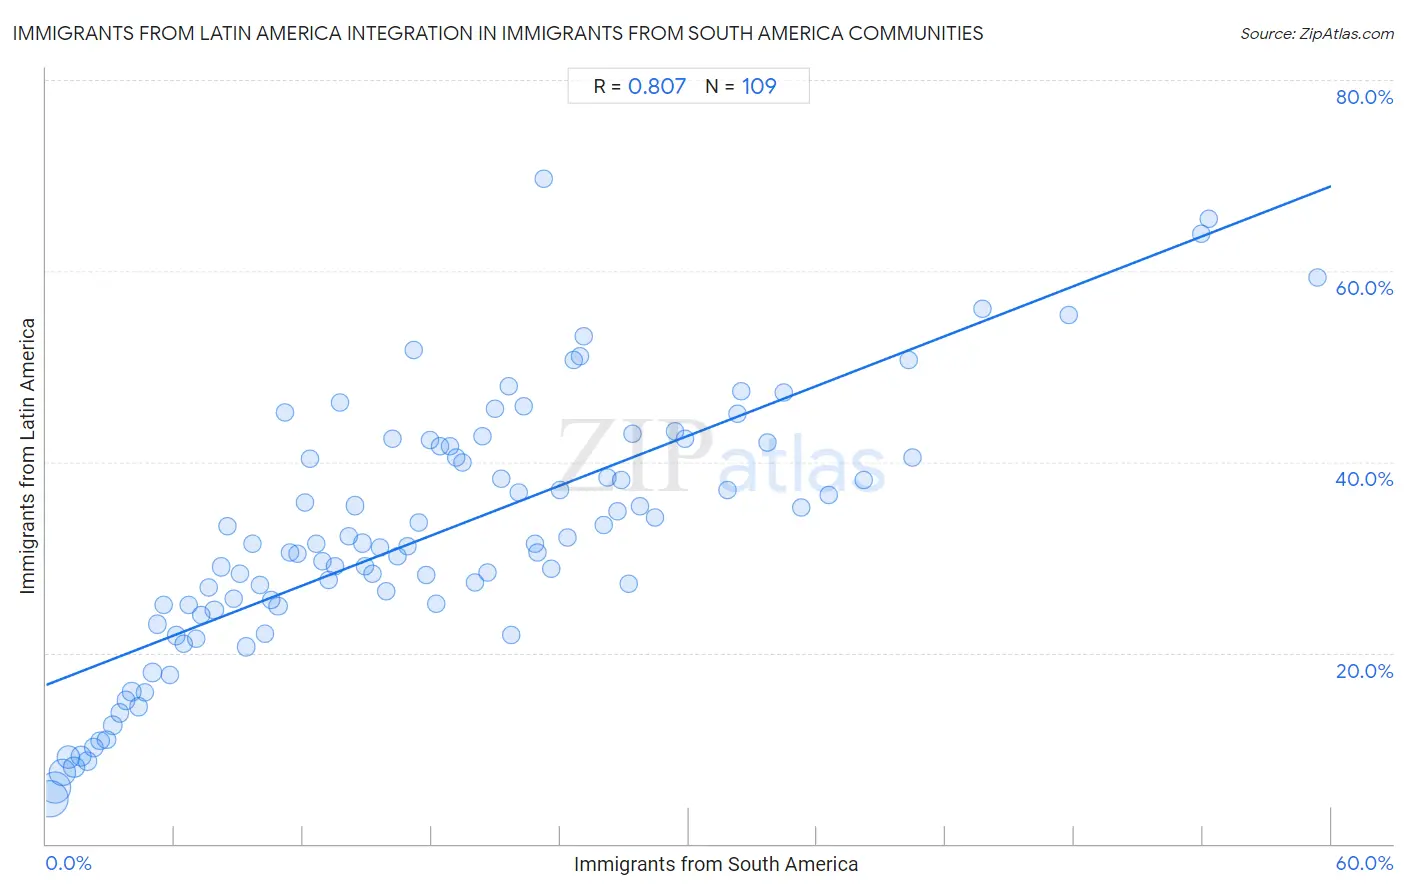 Immigrants from South America Integration in Immigrants from Latin America Communities